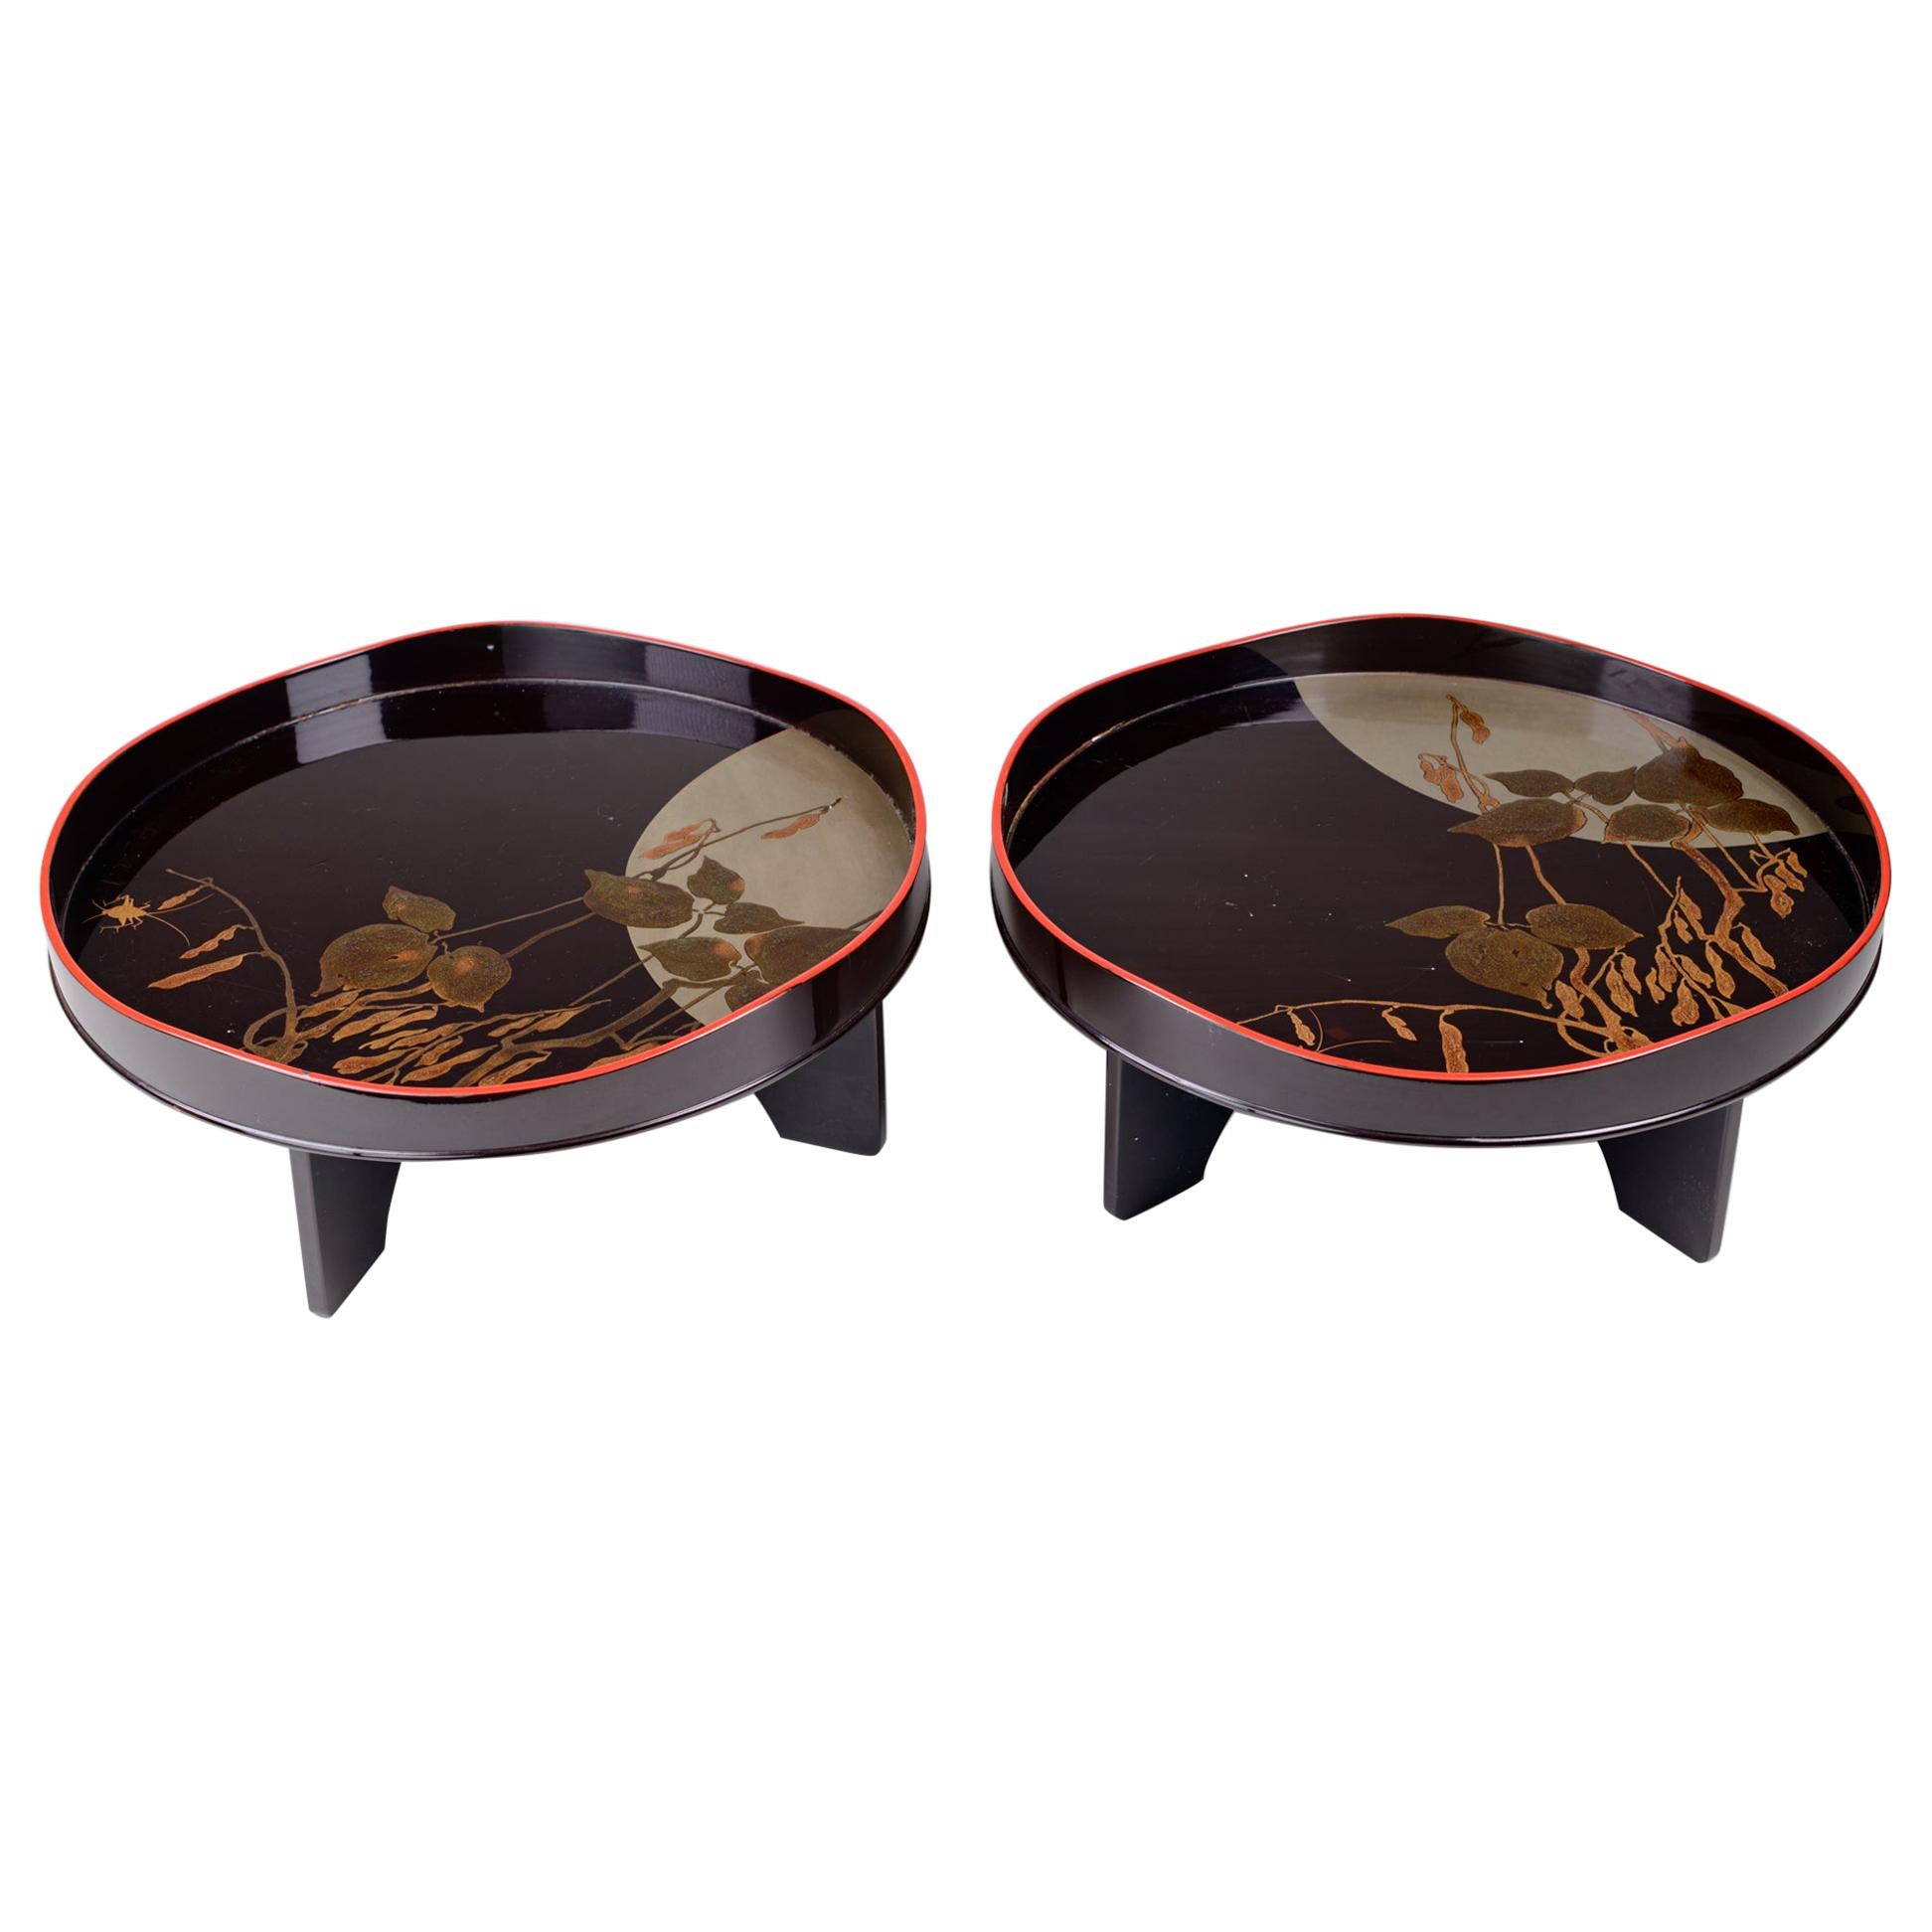 Pair of Antique Japanese Lacquer Trays For Sale